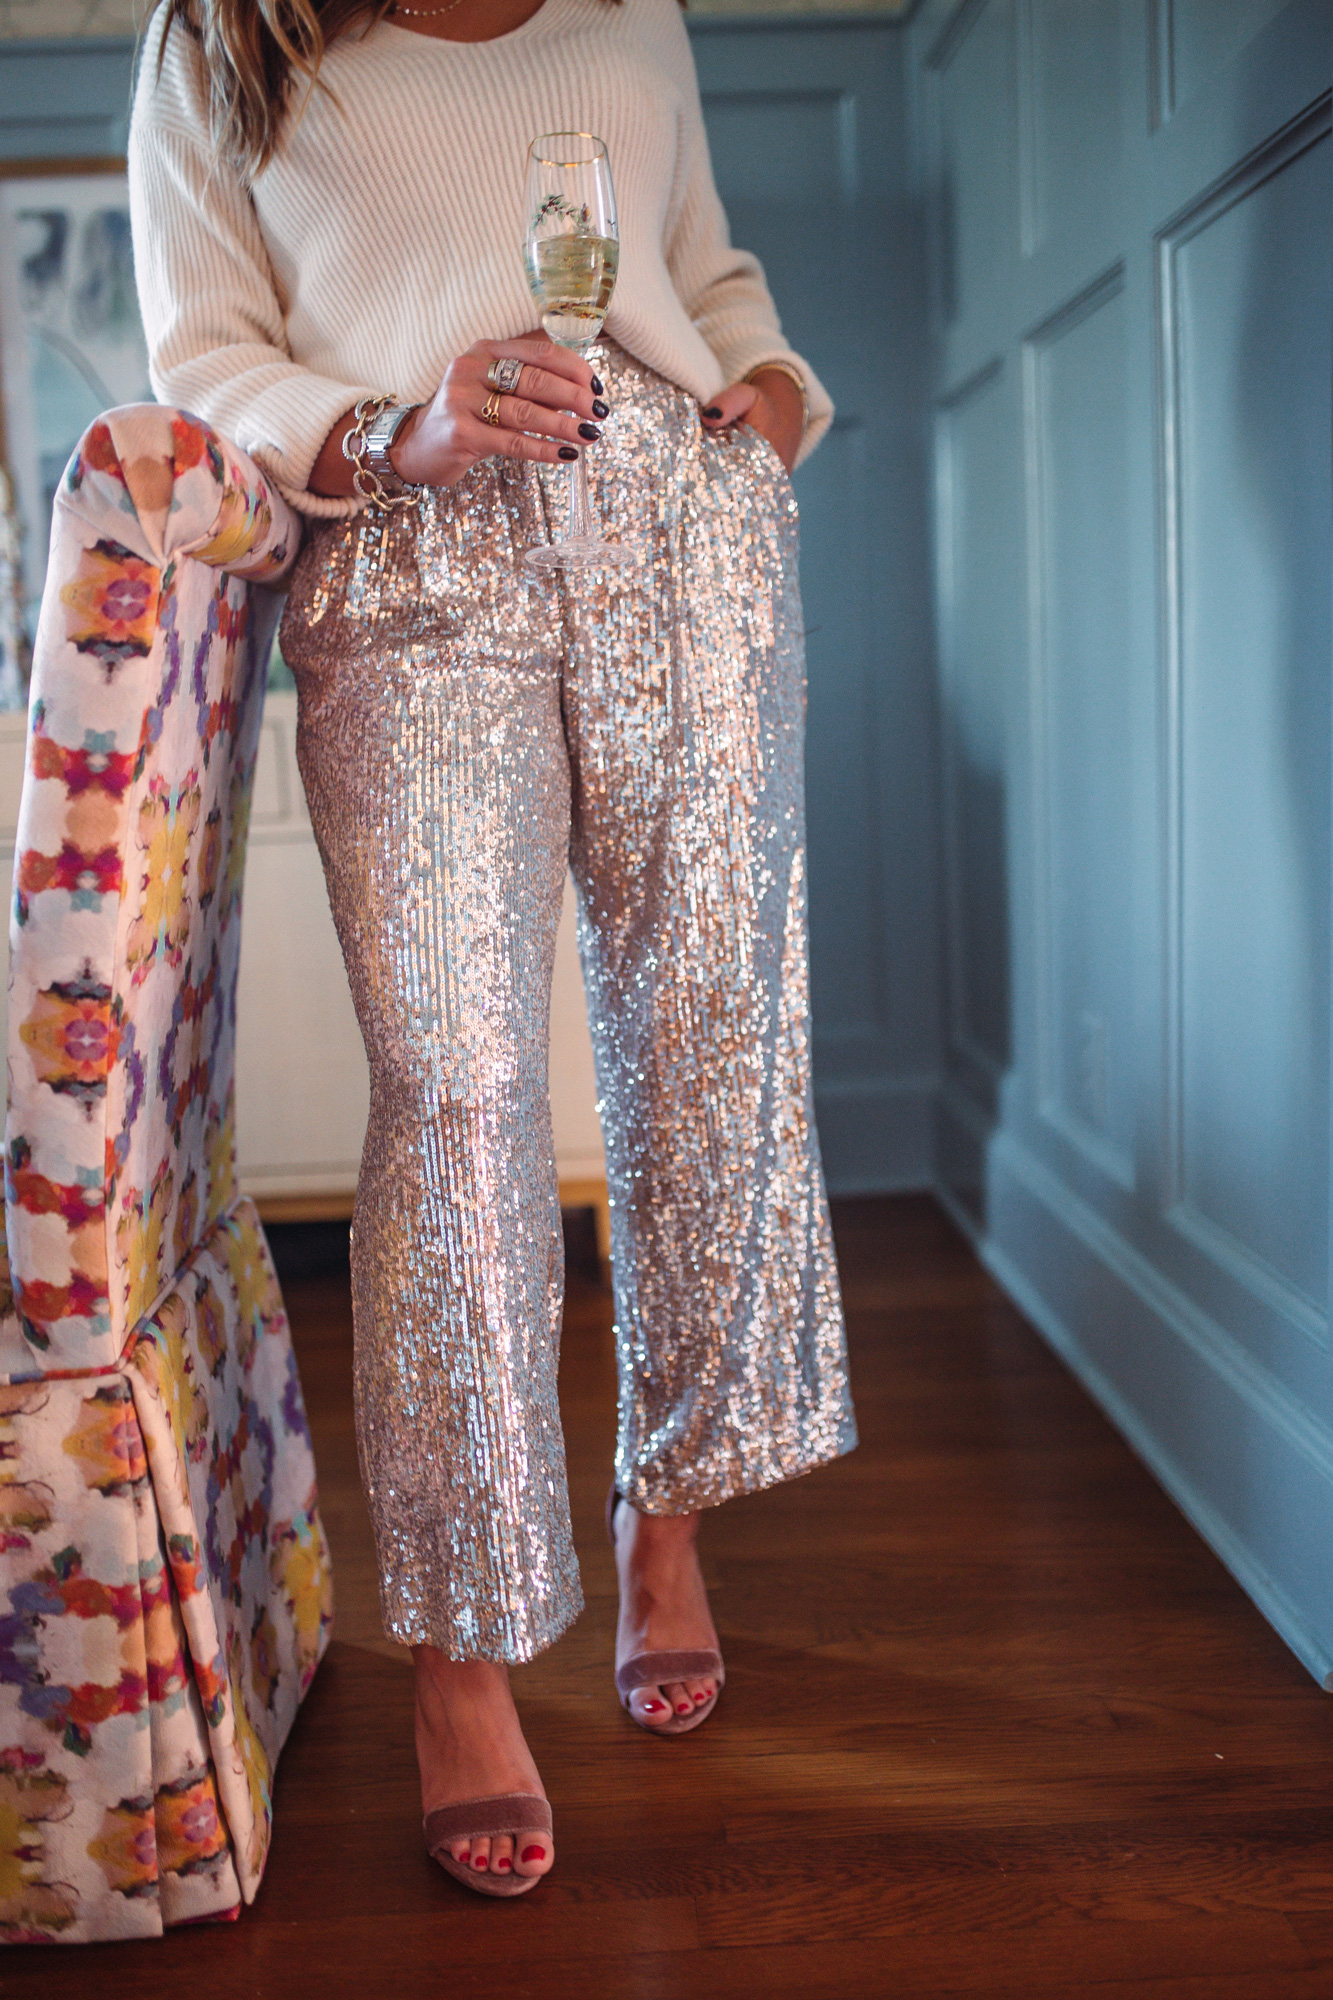 Holiday Outfit Inspo Part 2: Sequin Pants and Sweater